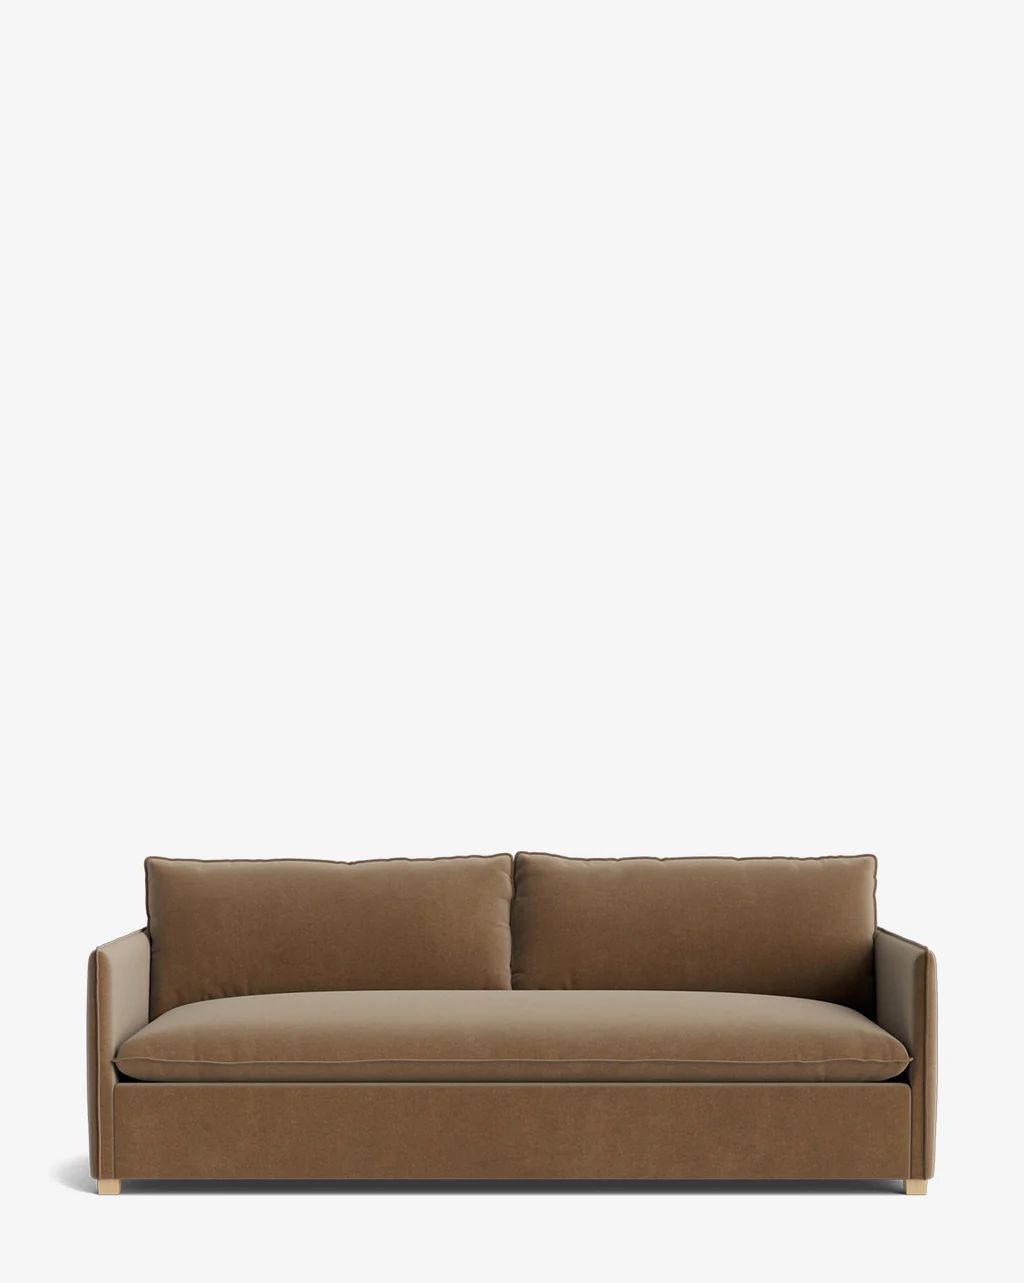 Monclair Upholstered Sofa | McGee & Co.